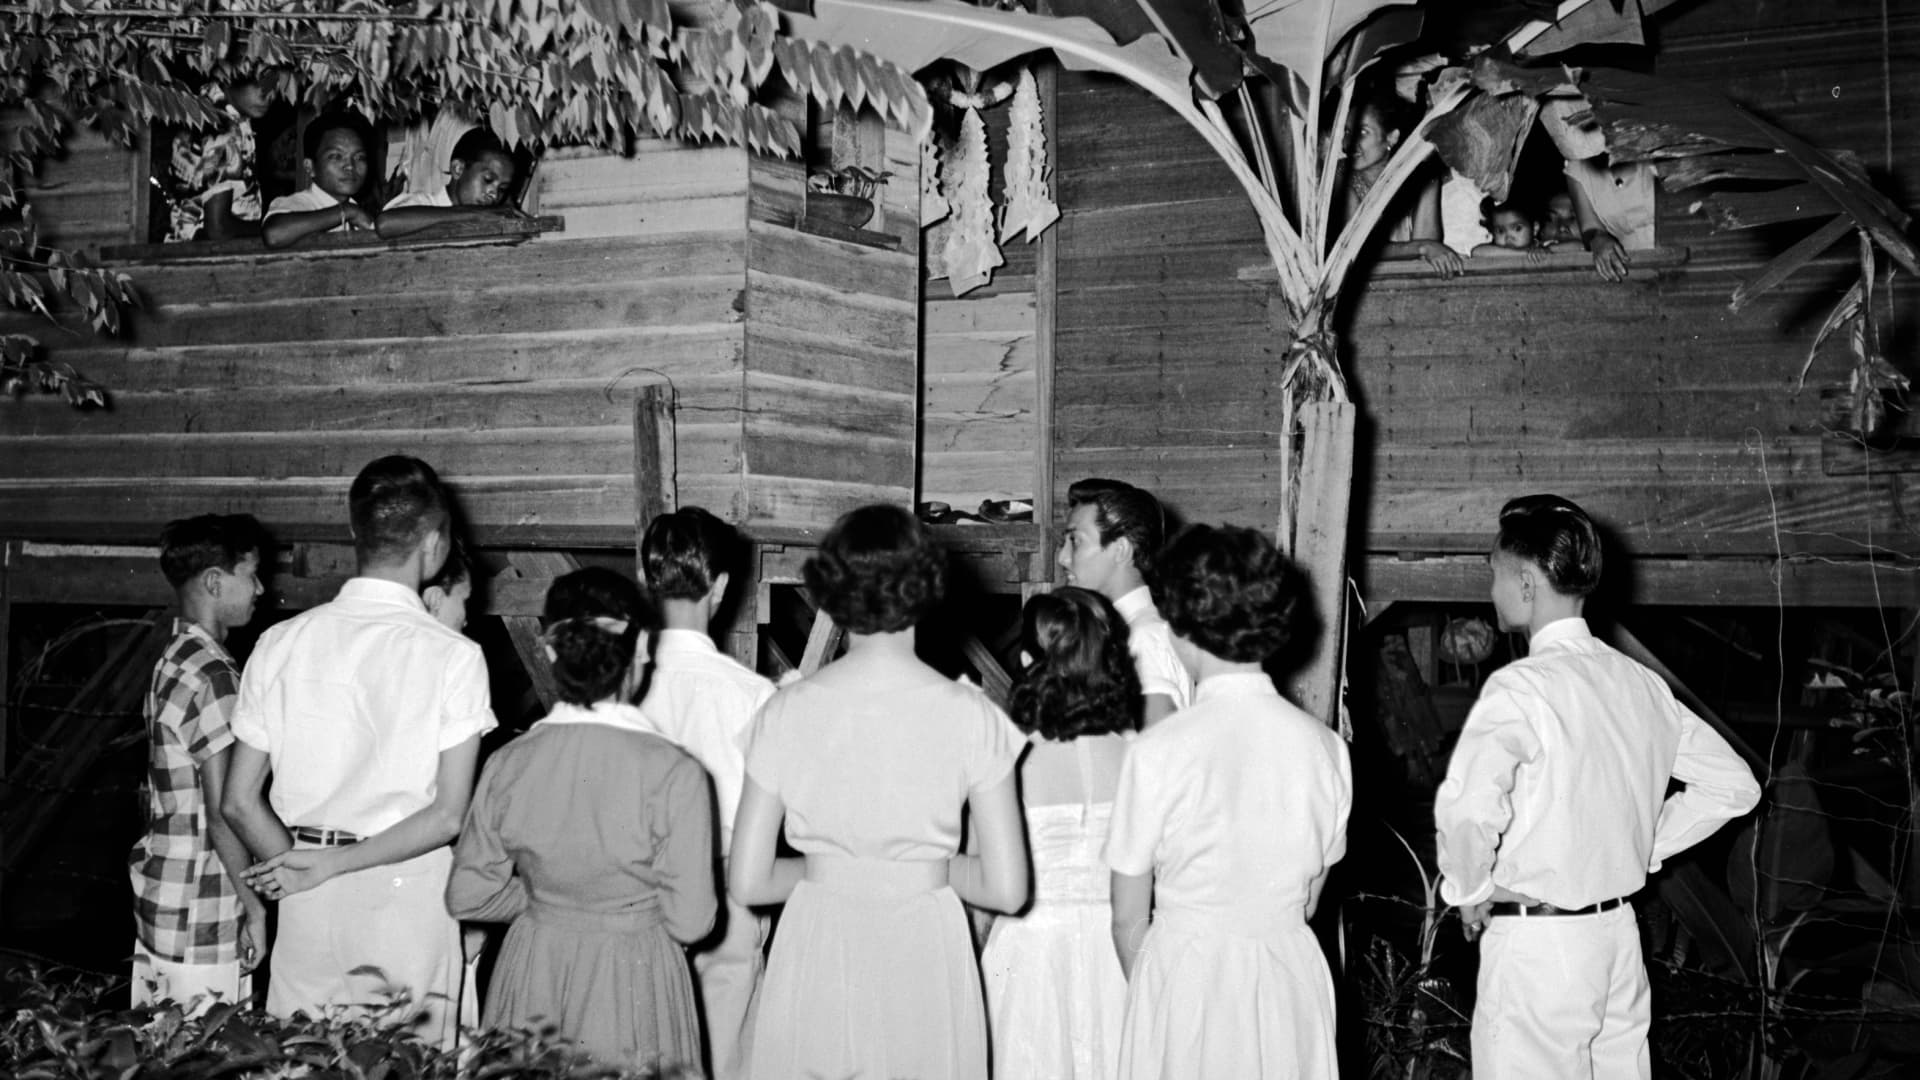 Joven Cuanang said when he was growing up in Ilocos in Luzon, children went house-to-house singing Christmas carols in exchange for tupig, a type of sweet rice cake, like the young Filipino carolers, circa 1955, shown here.